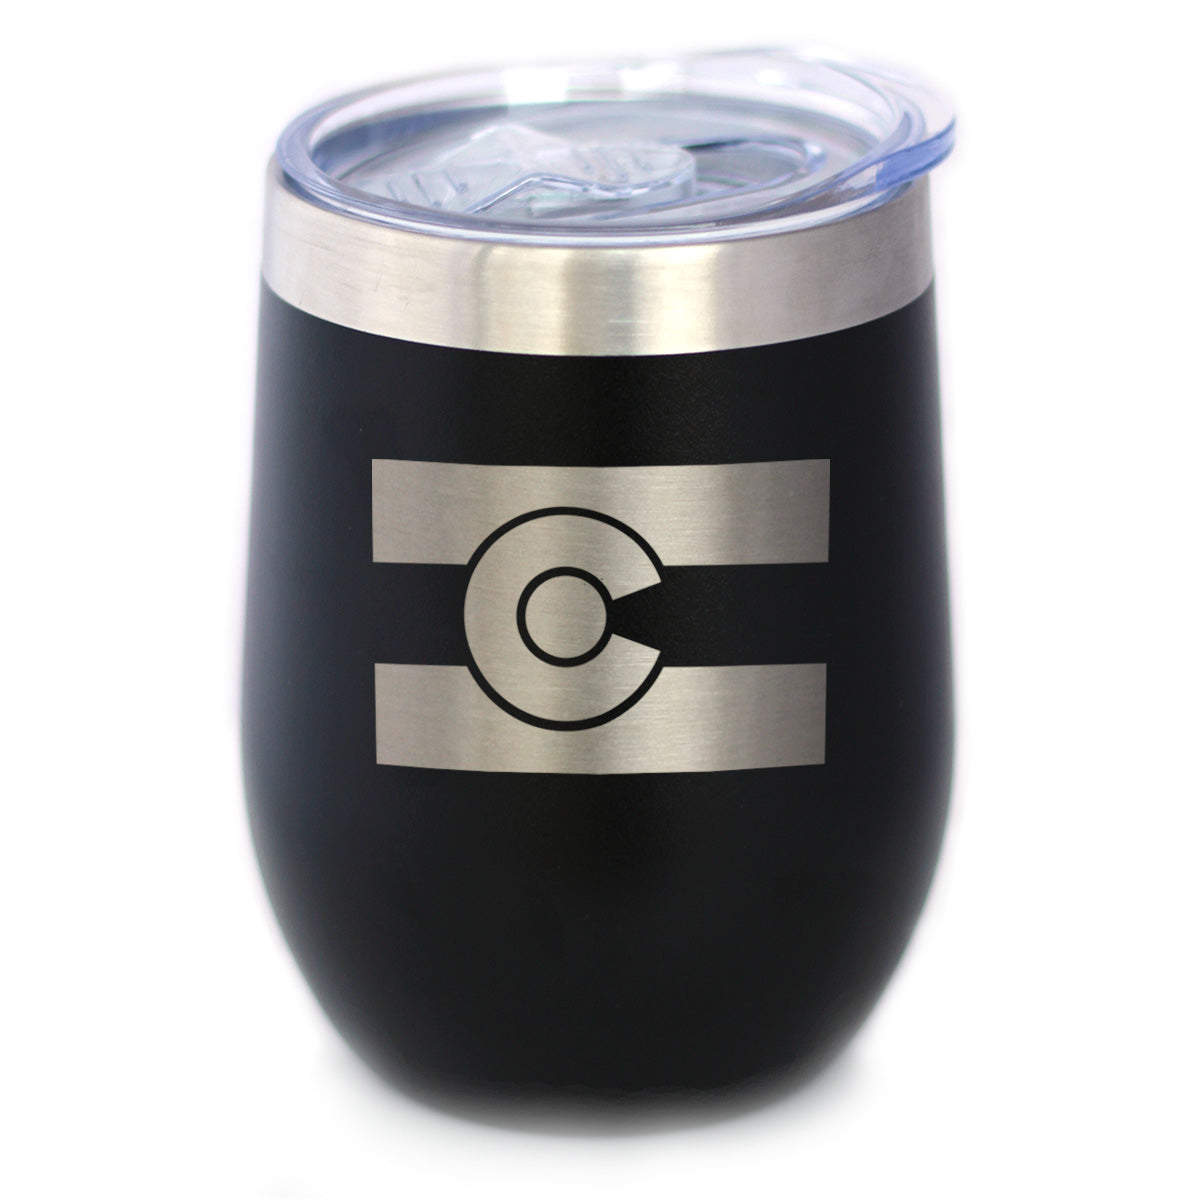 Colorado Flag - Wine Tumbler with Sliding Lid - Stemless Stainless Steel Insulated Cup - Cute Outdoor Camping Mug